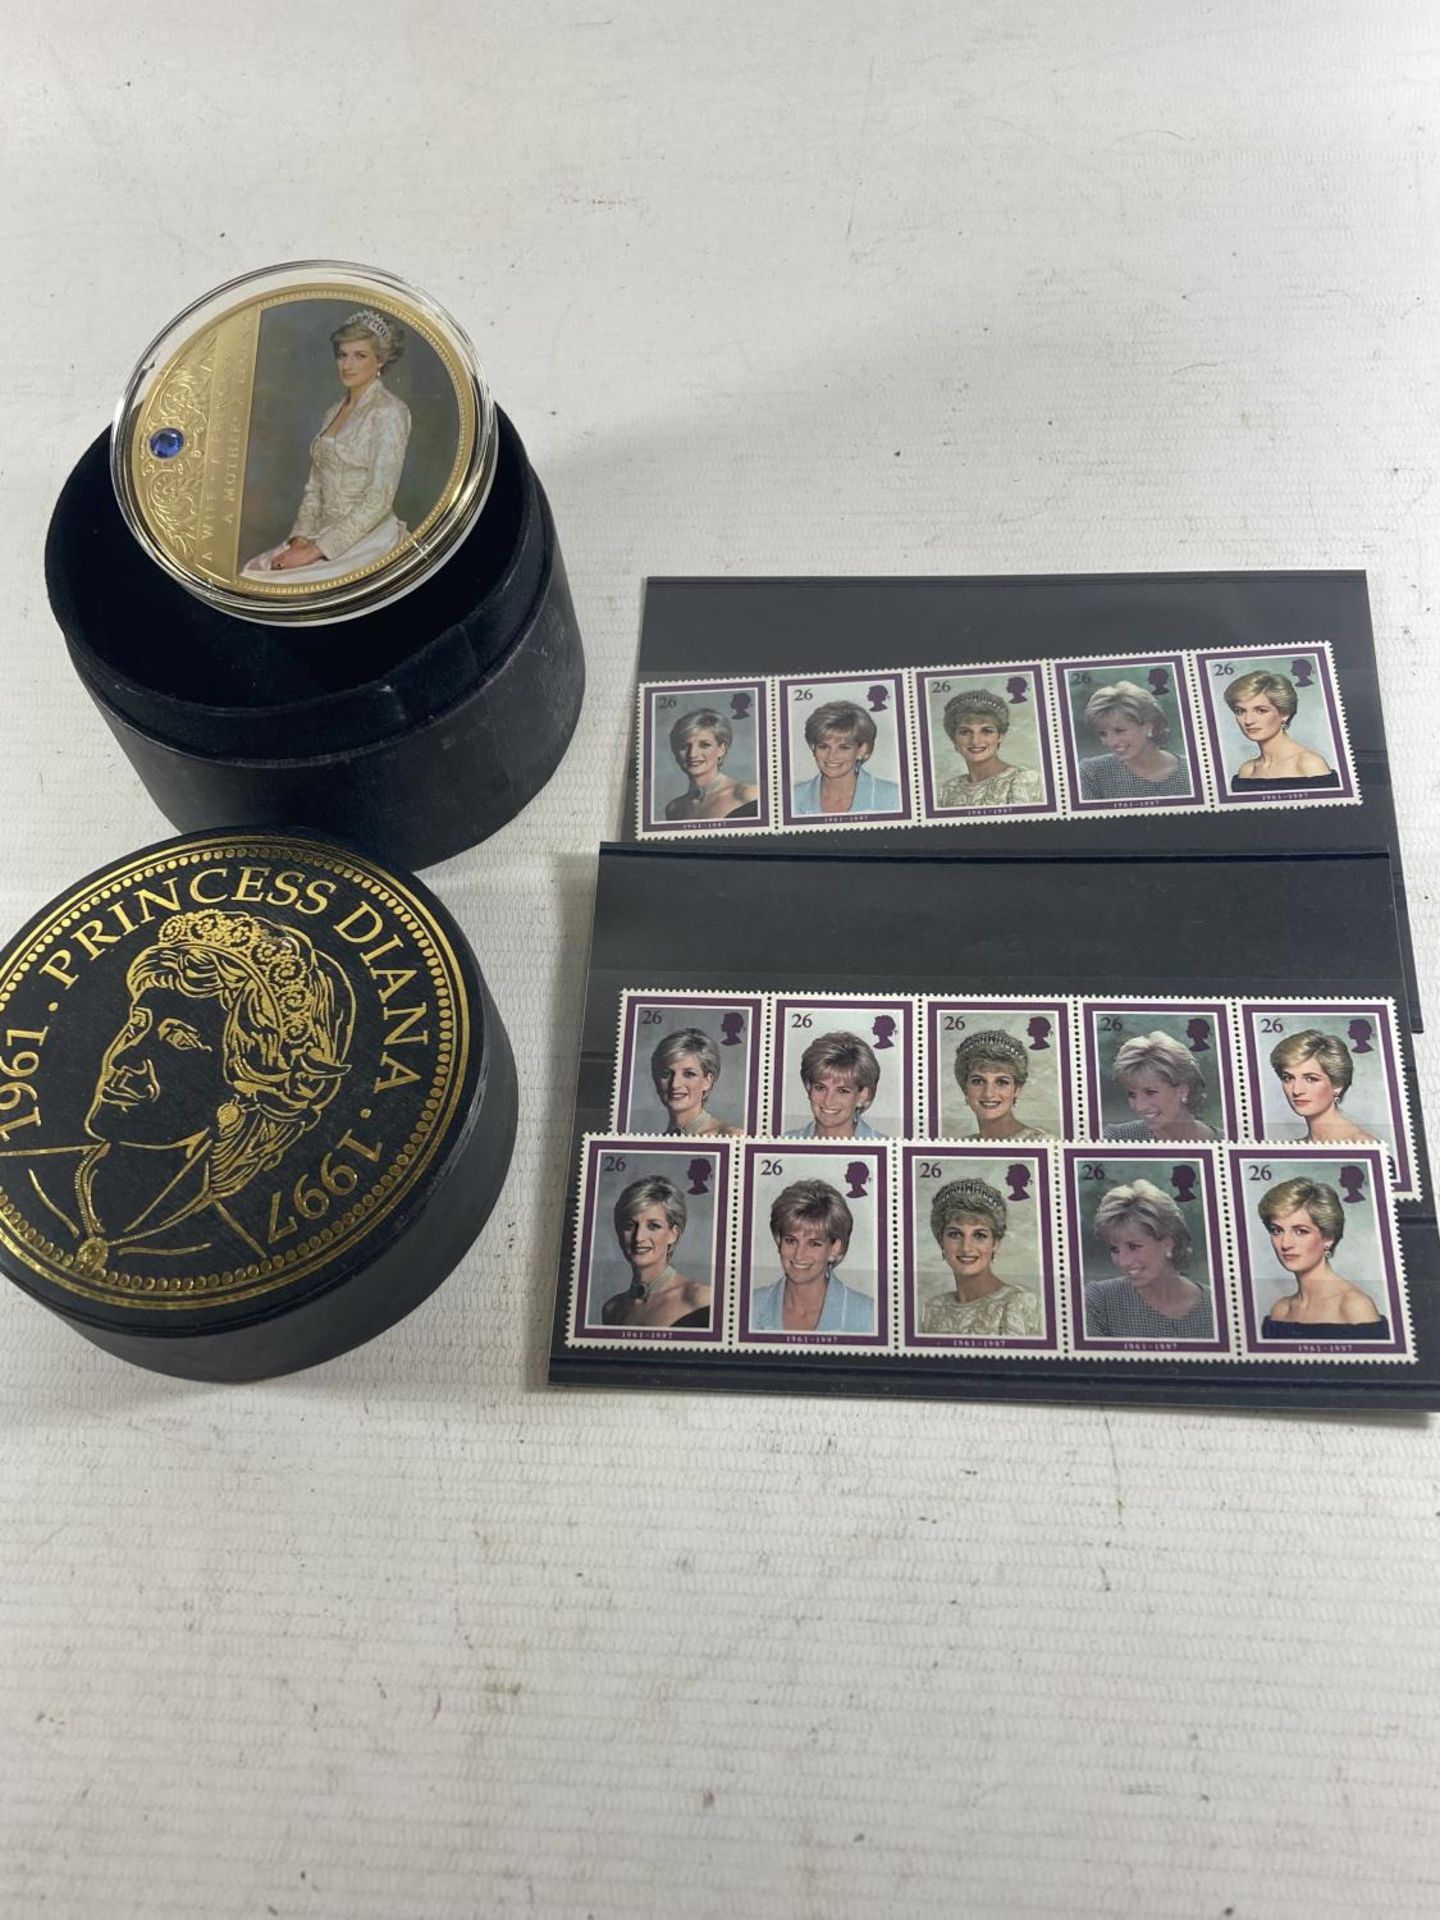 TWO NH MINT STRIPS OF GREAT BRITAIN PRINCESS OF WALES STAMPS TOGETHER WITH A CASED PRINCESS DIANA